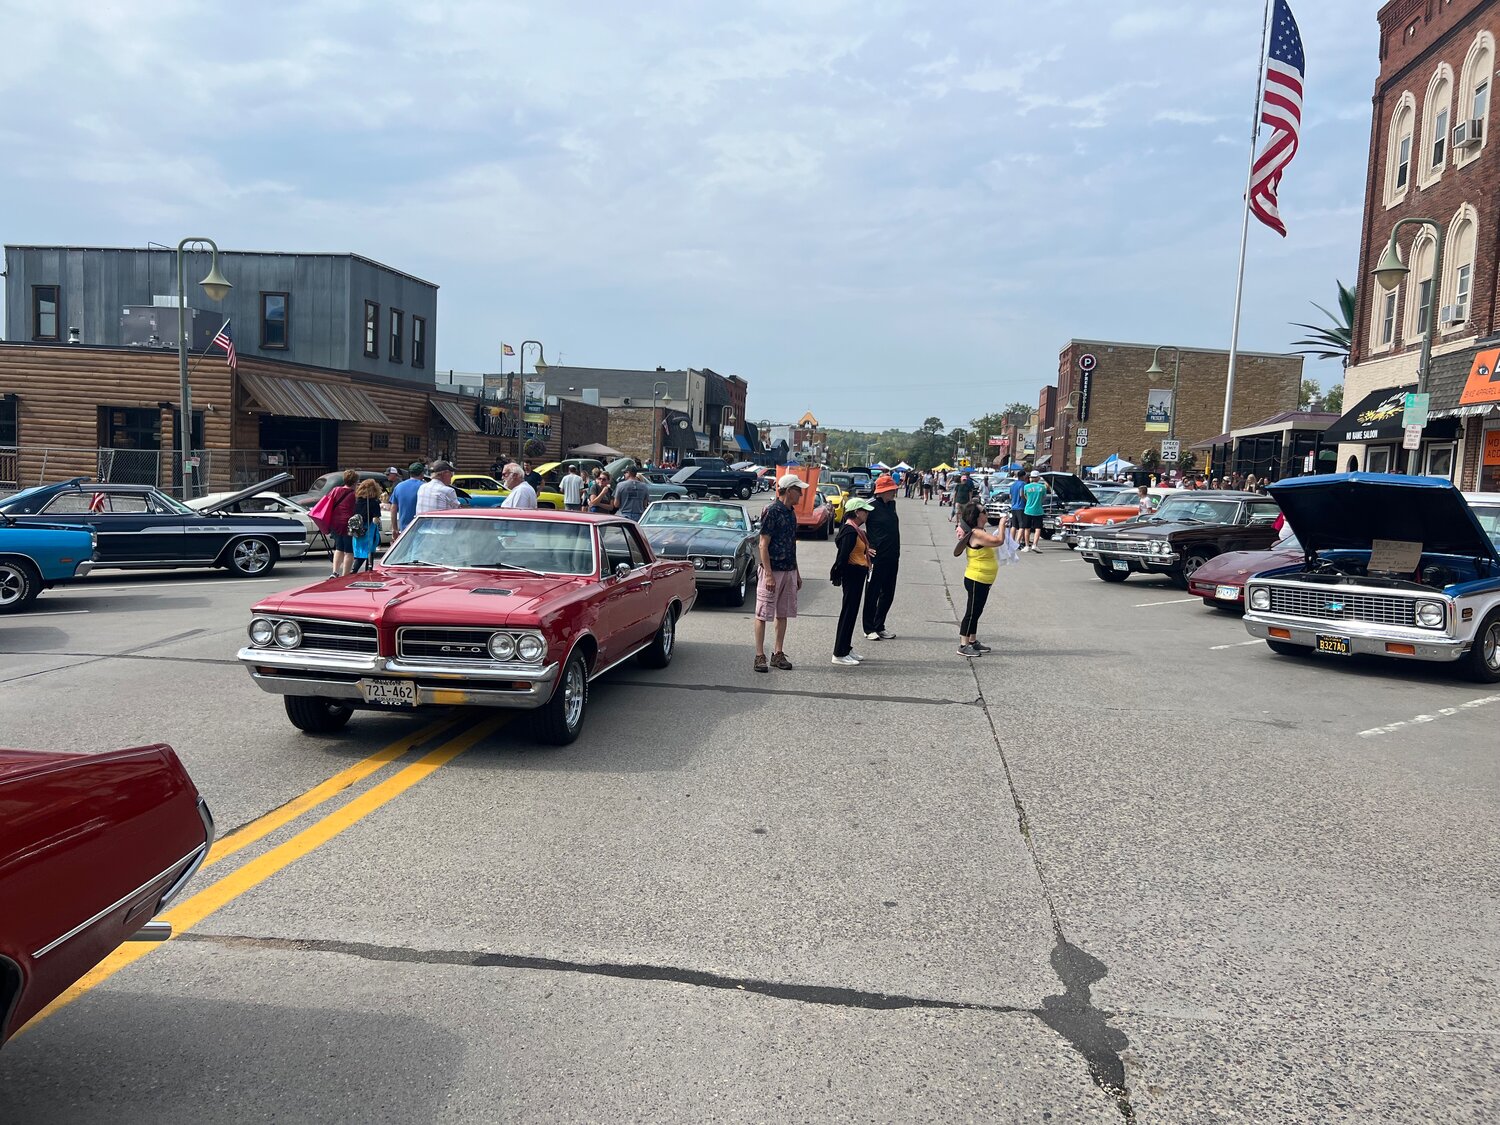 The Prescott Daze Car show was back on Saturday, Sept. 9 on Broad Street and bigger and better than ever. The downtown event also featured vendors congregated in the first block south of the Highway 10 bridge.